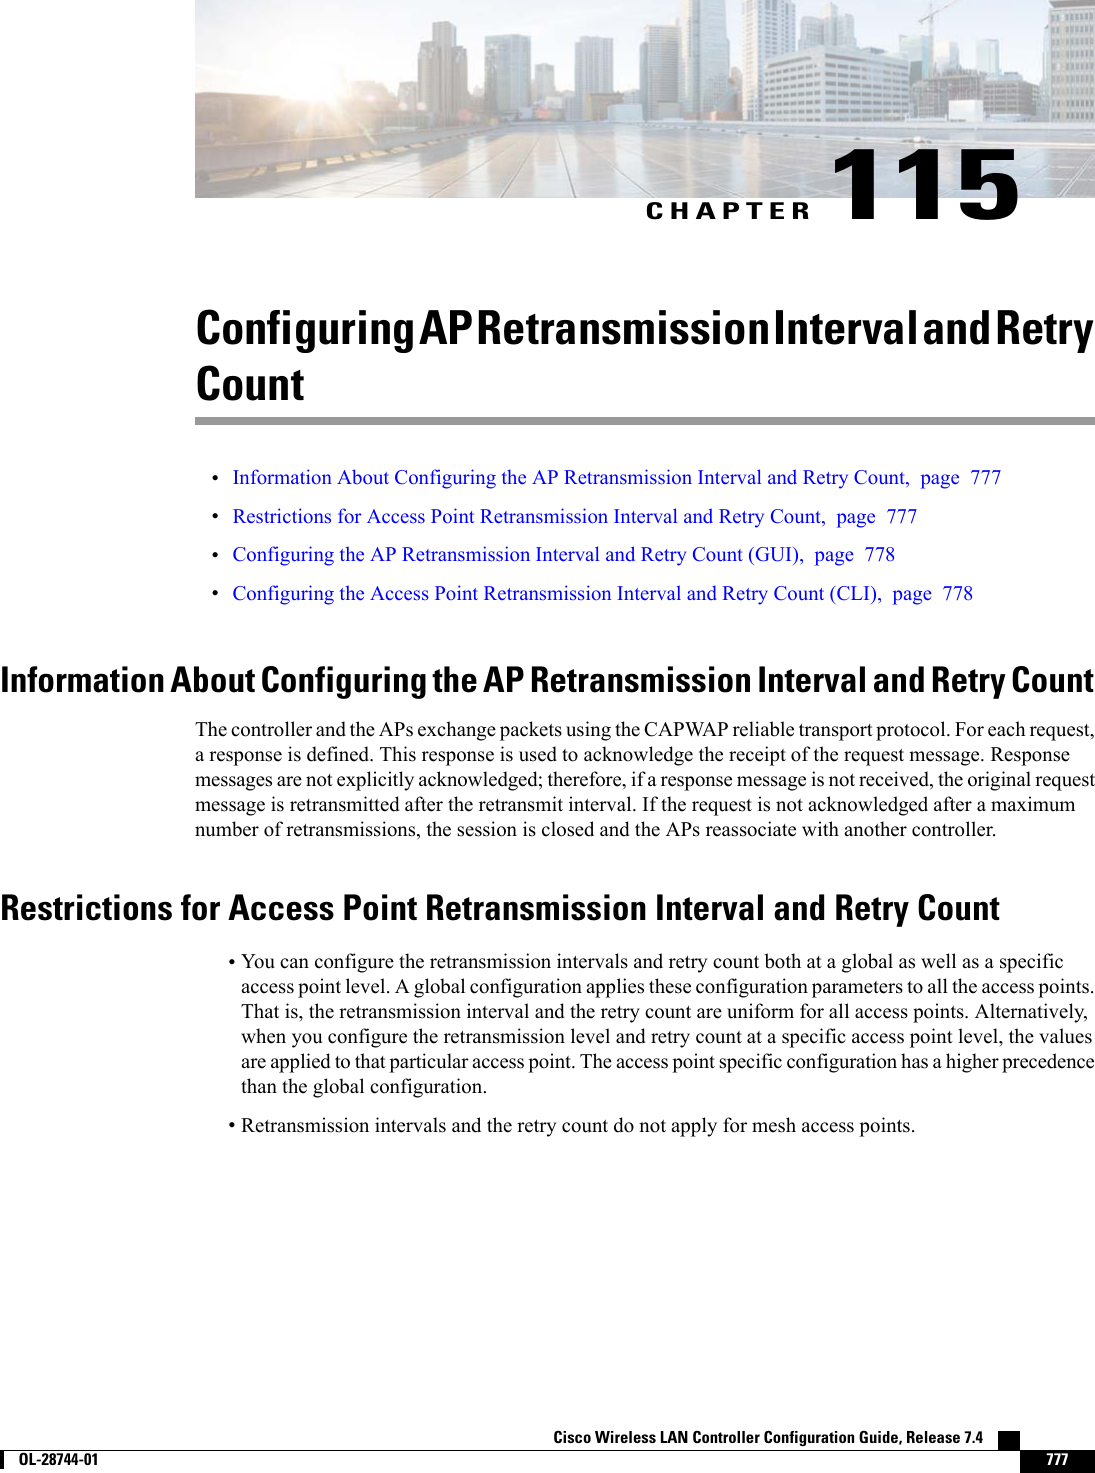 CHAPTER 115Configuring AP Retransmission Interval and RetryCount•Information About Configuring the AP Retransmission Interval and Retry Count, page 777•Restrictions for Access Point Retransmission Interval and Retry Count, page 777•Configuring the AP Retransmission Interval and Retry Count (GUI), page 778•Configuring the Access Point Retransmission Interval and Retry Count (CLI), page 778Information About Configuring the AP Retransmission Interval and Retry CountThe controller and the APs exchange packets using the CAPWAP reliable transport protocol. For each request,a response is defined. This response is used to acknowledge the receipt of the request message. Responsemessages are not explicitly acknowledged; therefore, if a response message is not received, the original requestmessage is retransmitted after the retransmit interval. If the request is not acknowledged after a maximumnumber of retransmissions, the session is closed and the APs reassociate with another controller.Restrictions for Access Point Retransmission Interval and Retry Count•You can configure the retransmission intervals and retry count both at a global as well as a specificaccess point level. A global configuration applies these configuration parameters to all the access points.That is, the retransmission interval and the retry count are uniform for all access points. Alternatively,when you configure the retransmission level and retry count at a specific access point level, the valuesare applied to that particular access point. The access point specific configuration has a higher precedencethan the global configuration.•Retransmission intervals and the retry count do not apply for mesh access points.Cisco Wireless LAN Controller Configuration Guide, Release 7.4        OL-28744-01 777